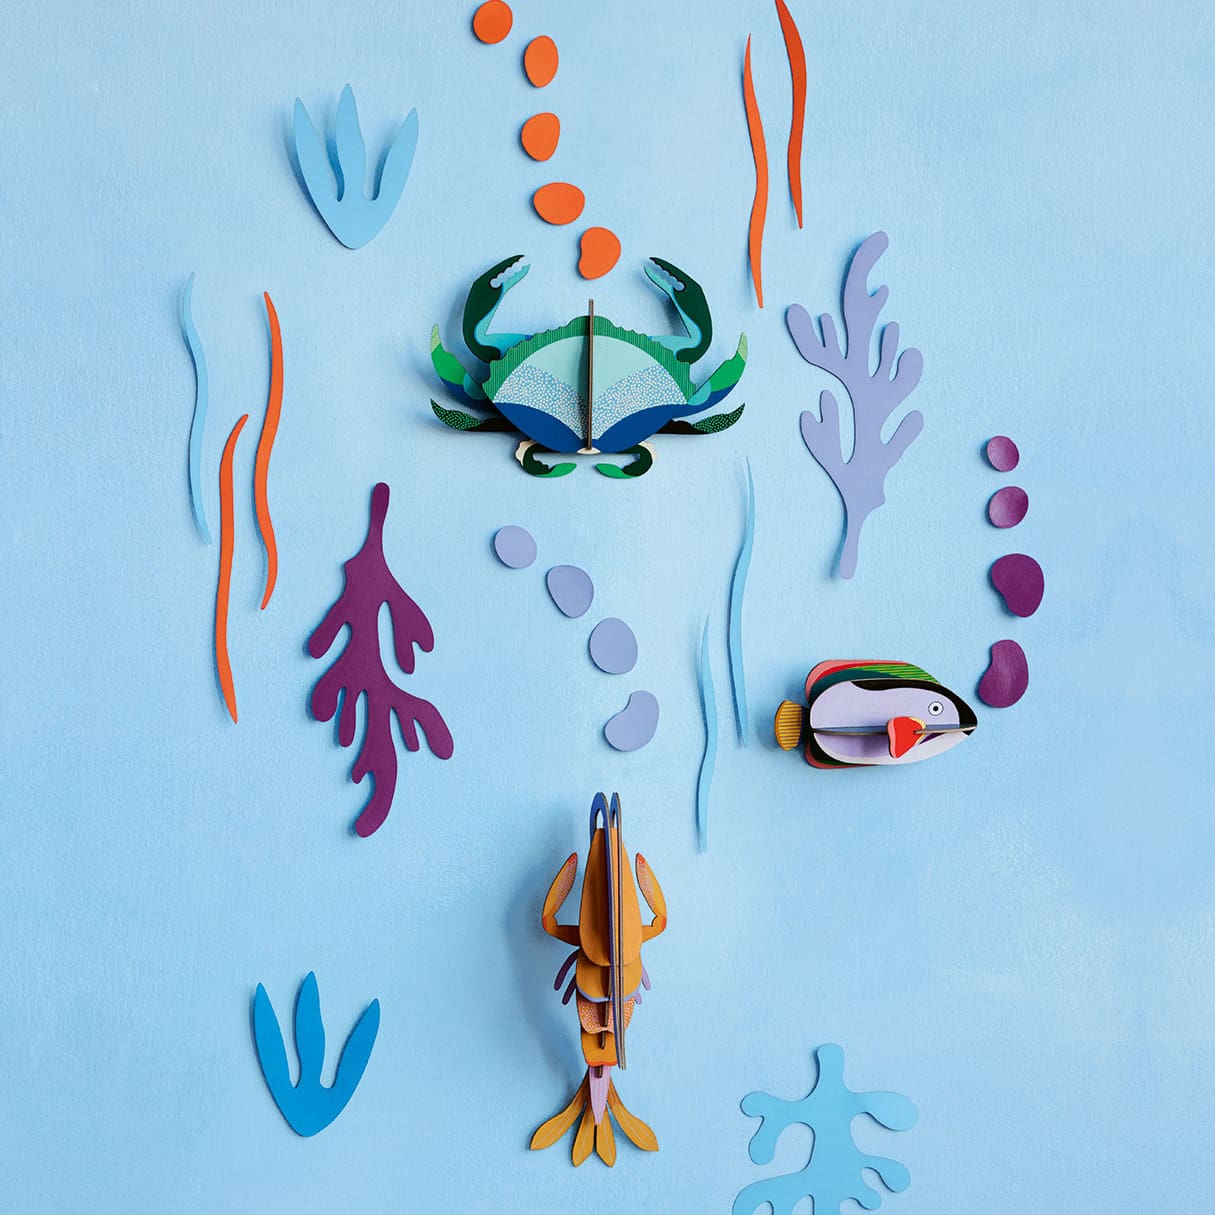 ocean themed wall decor with crab, shrimp and tropical fish by studio roof.